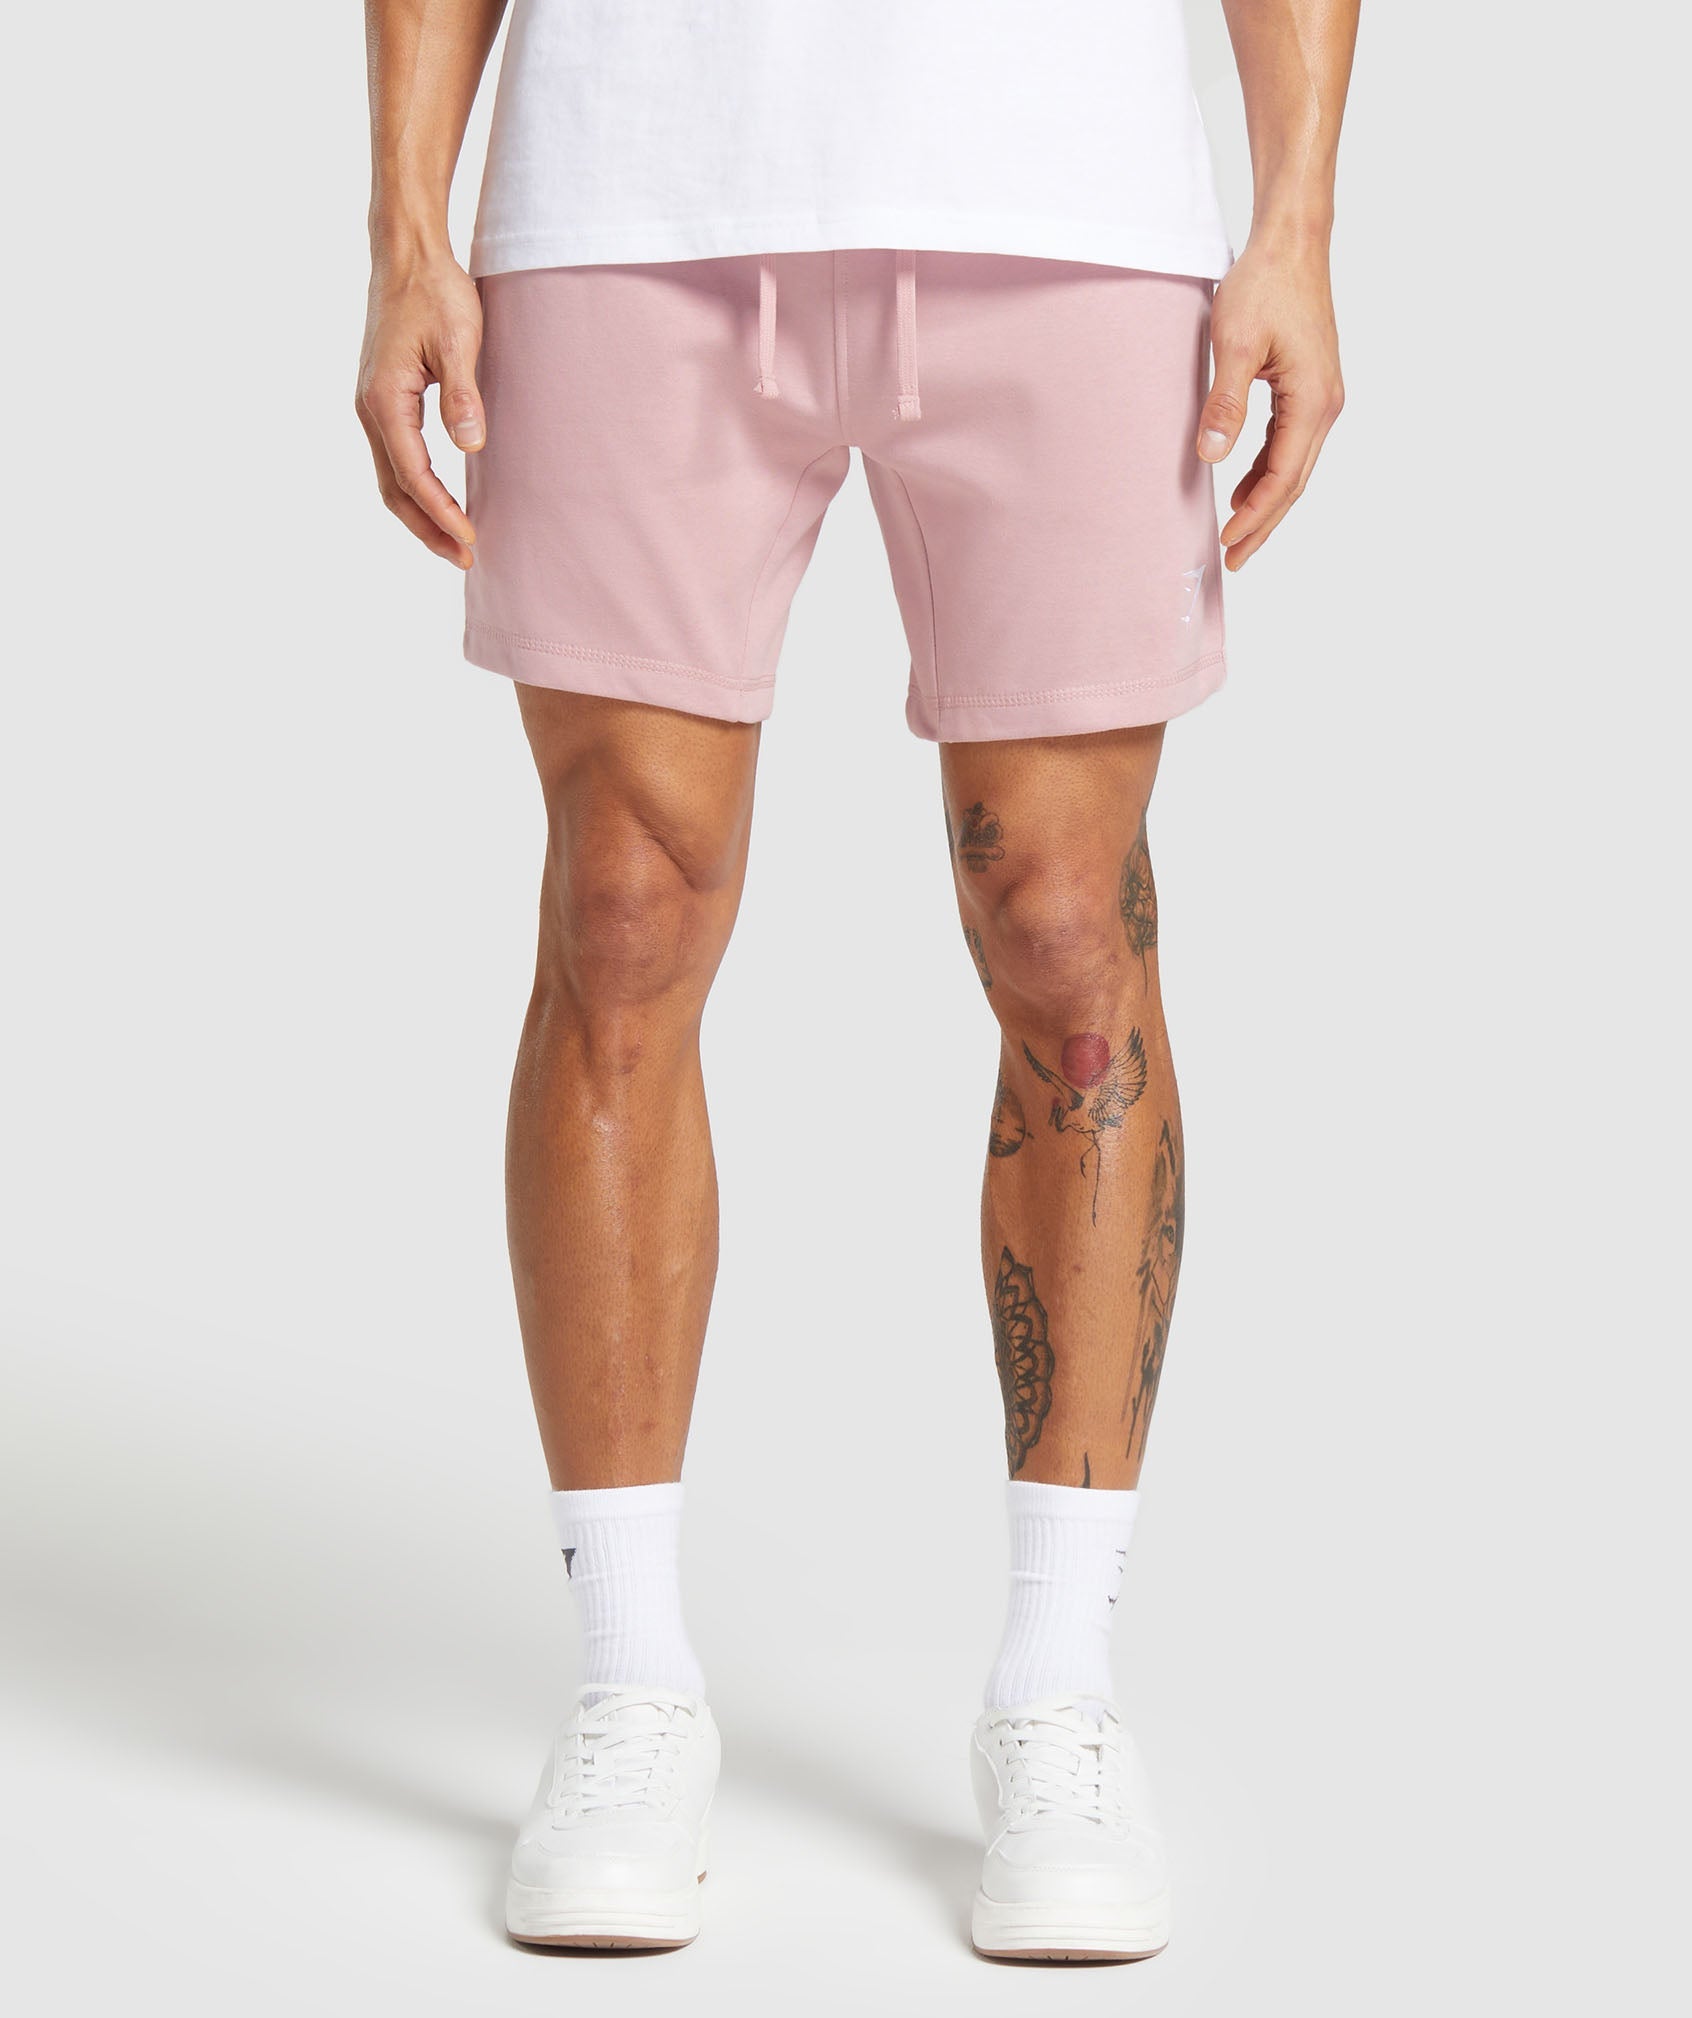 Crest Shorts in Light Pink